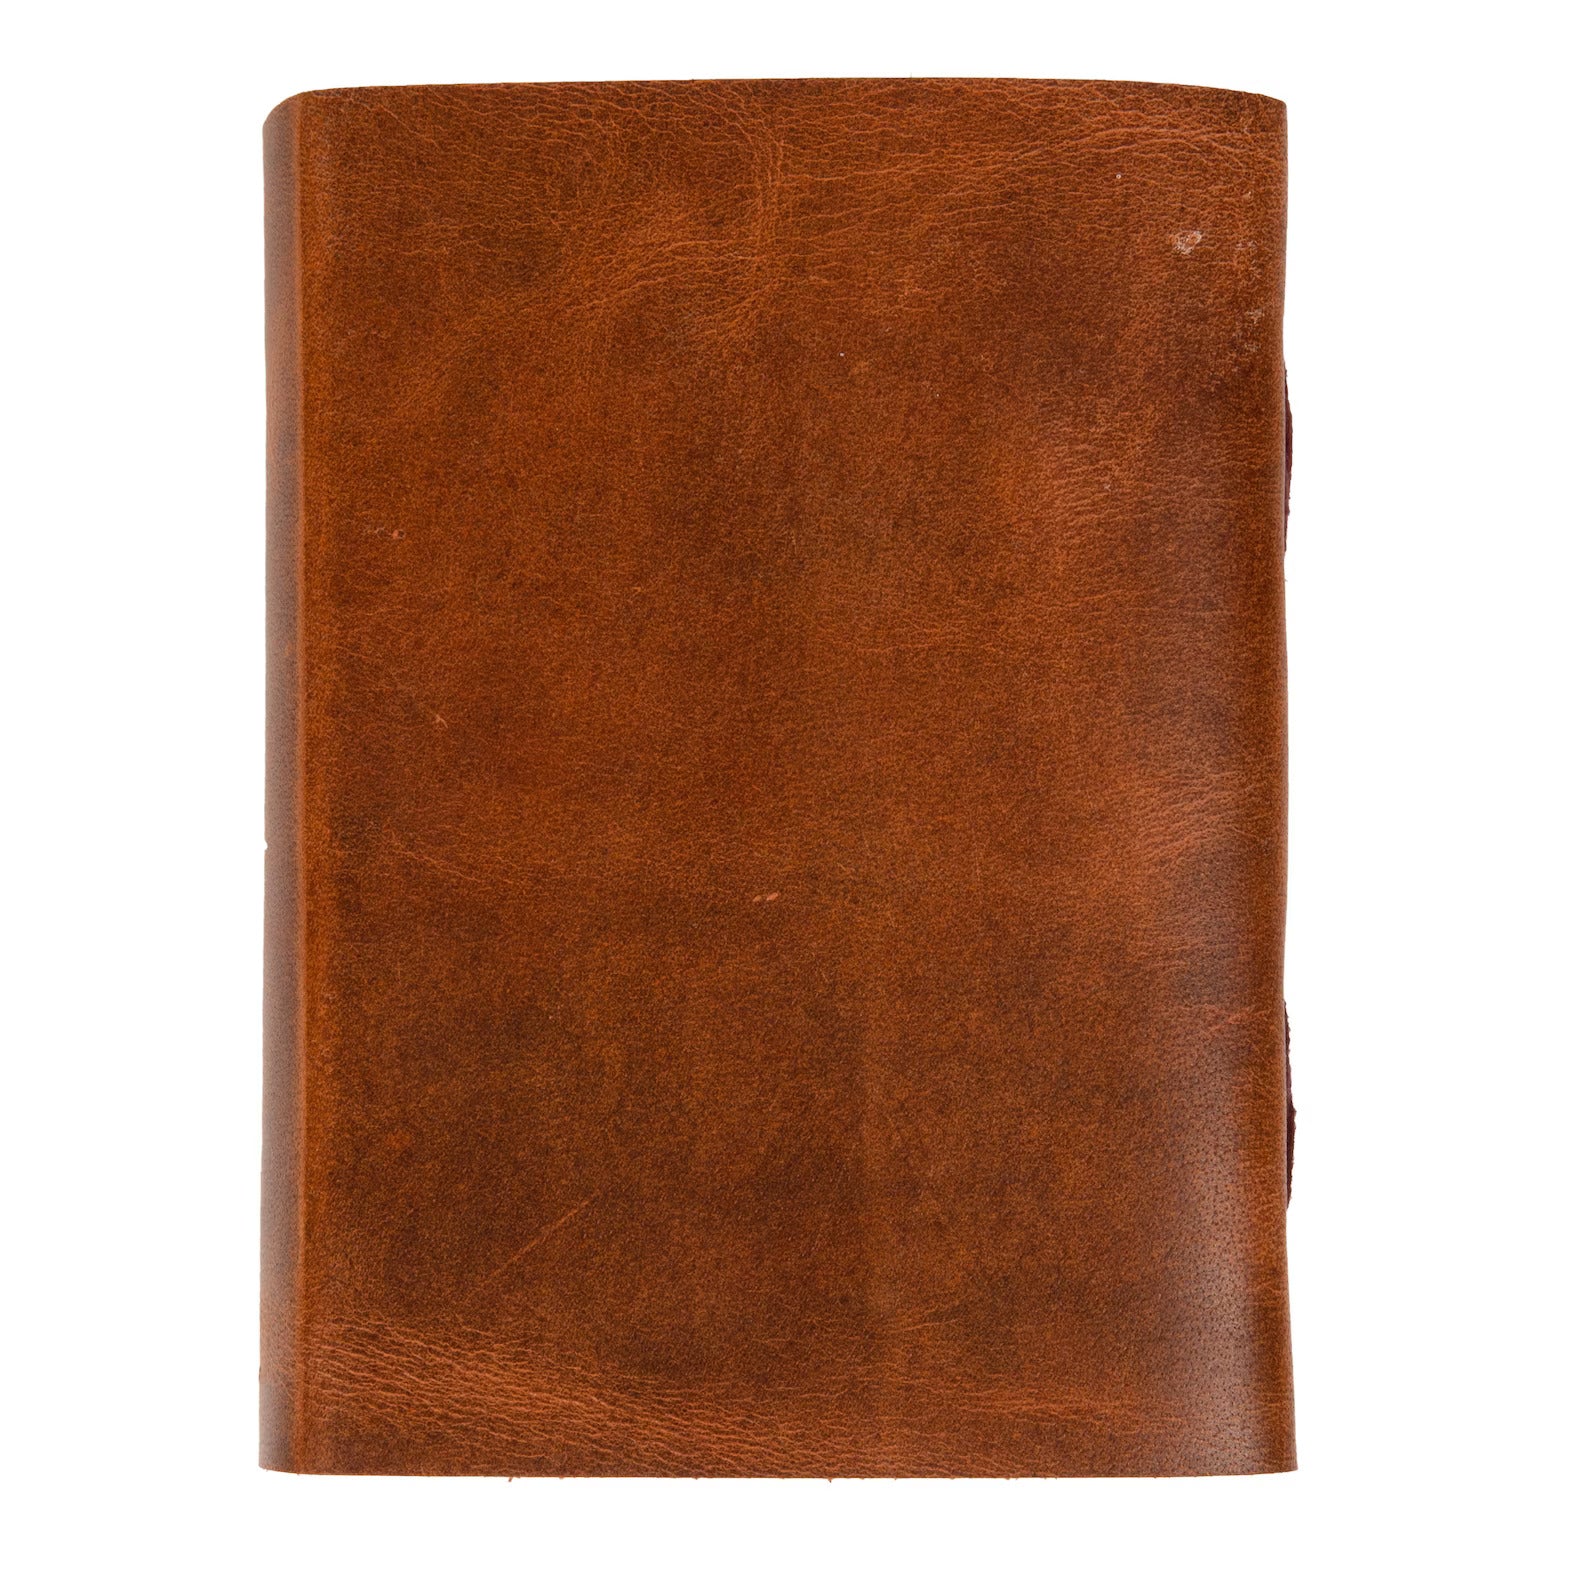 Leather Journal Notebook, Cotton Recycled Paper Travel Journal with Belt Cover